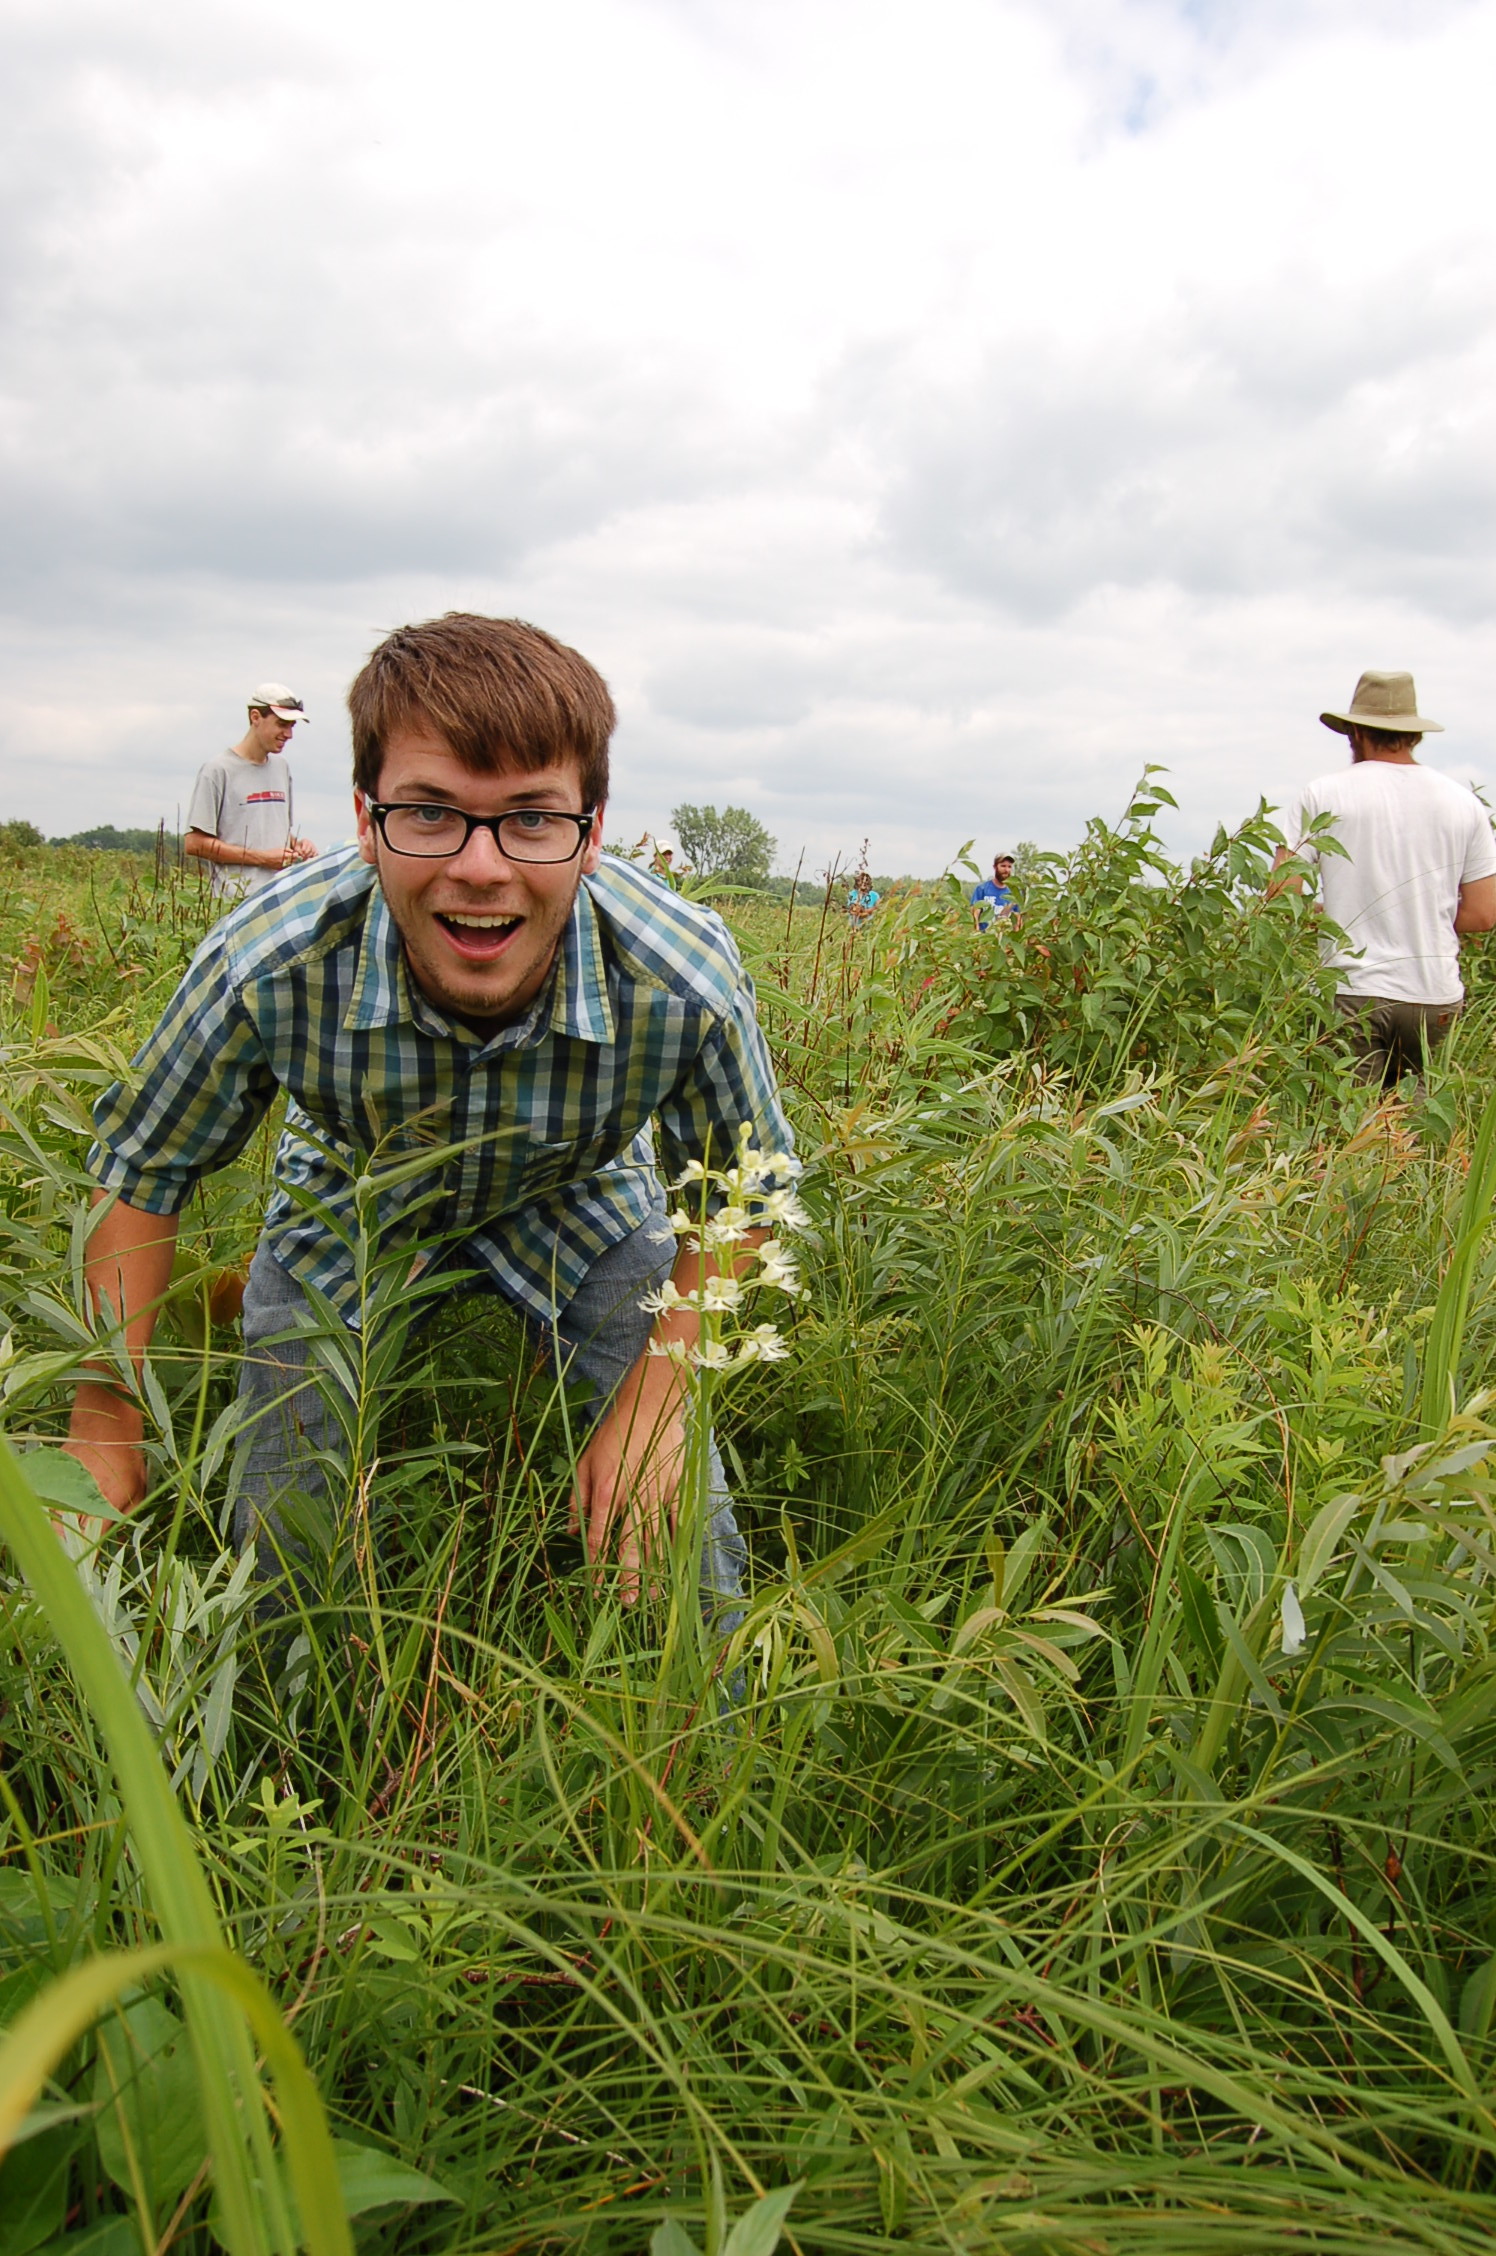 We partner with the UW Arboretum to manage Faville Prairie, where the state endangered eastern white-fringed prairie orchid has a robust population